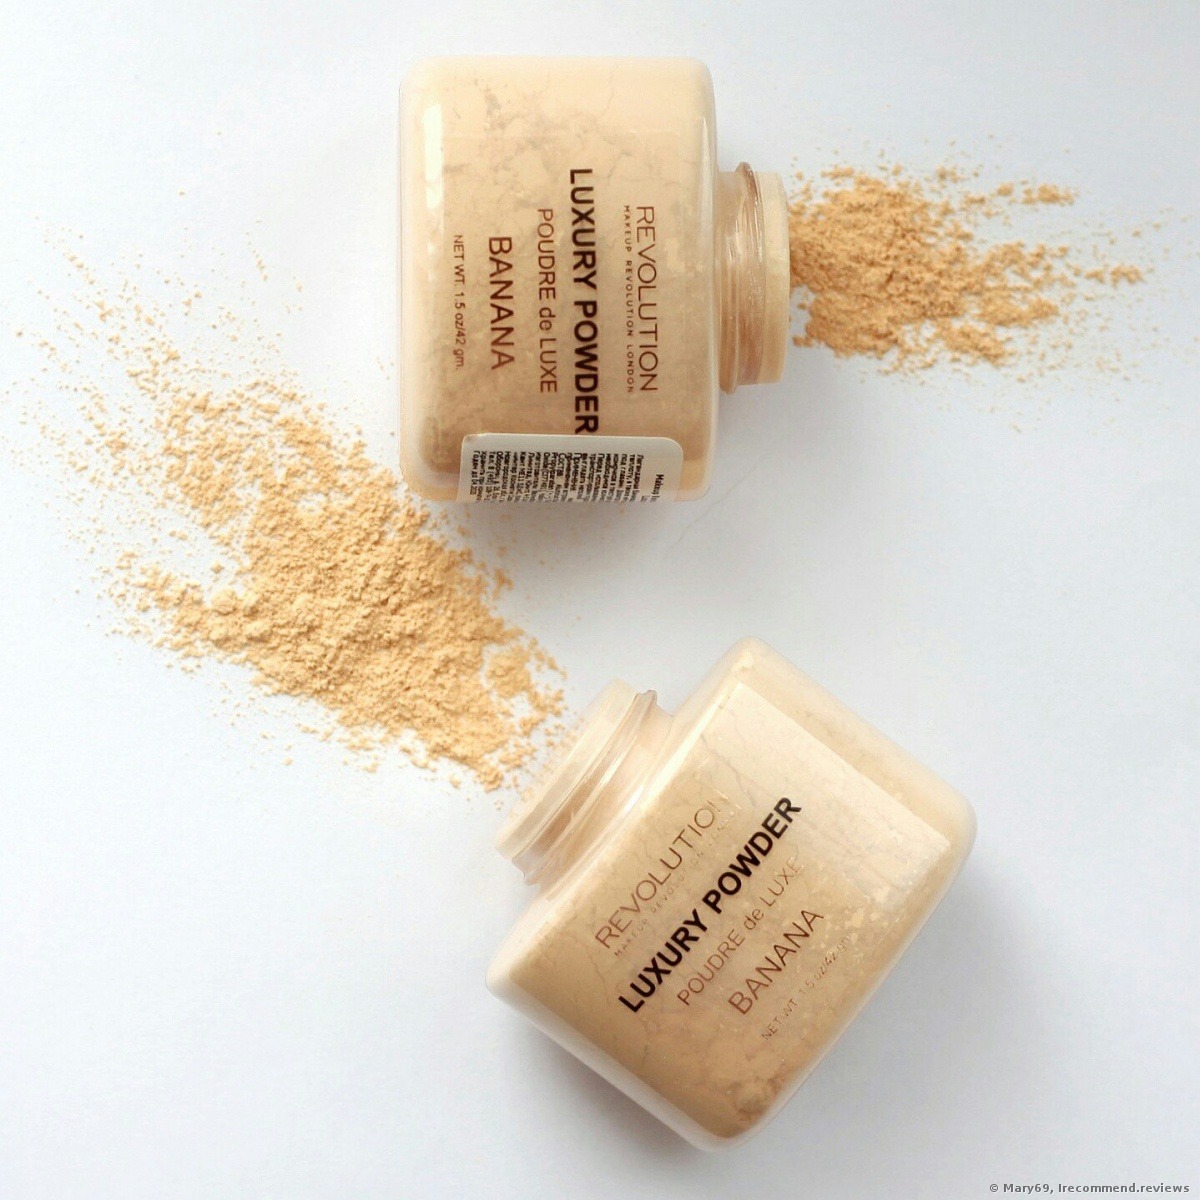 Makeup Revolution Luxury Banana Powder - «This is best powder ever!» Consumer reviews